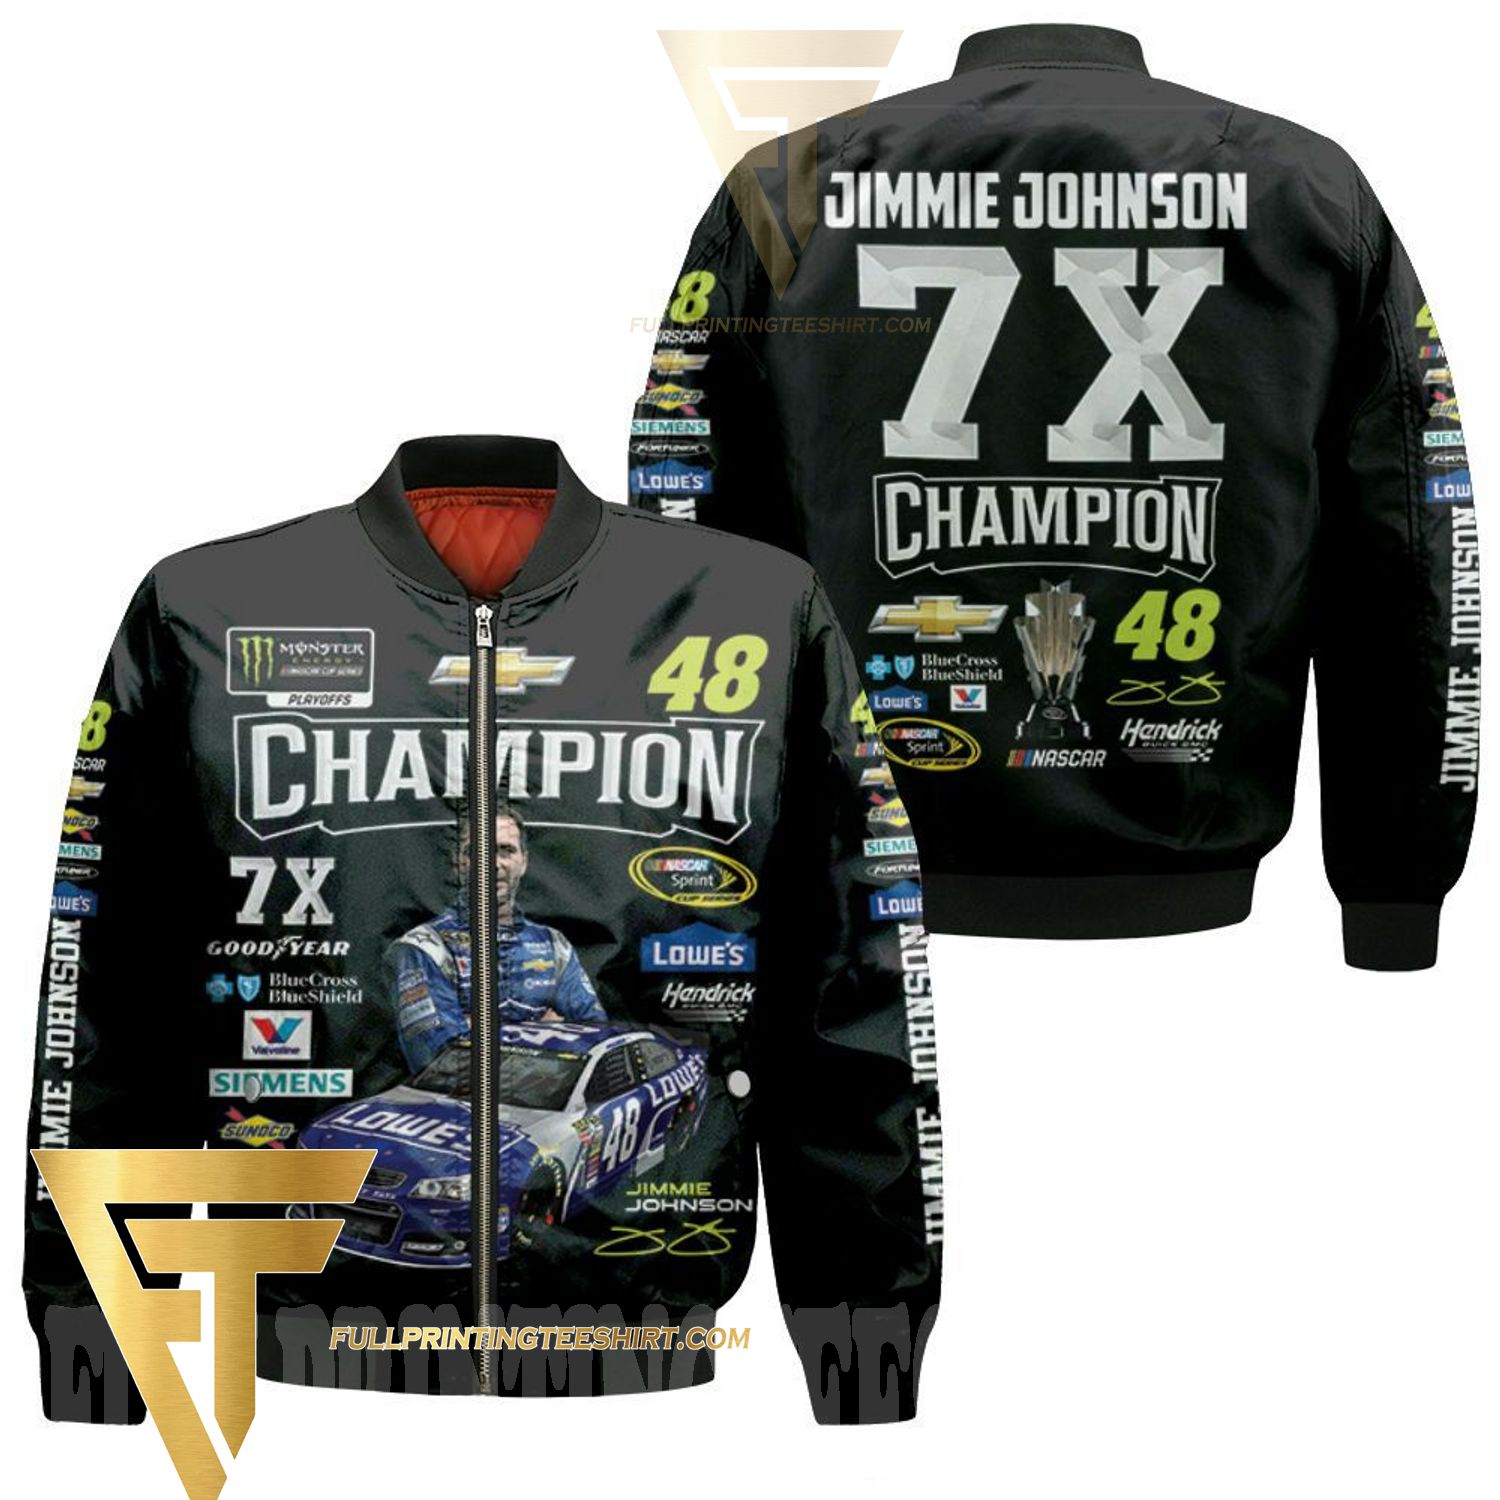 crisis pop pianist Top-selling item] Jimmie Johnson 7x Champion Nascar Racing Driver Signature  For Fan Bomber Jacket